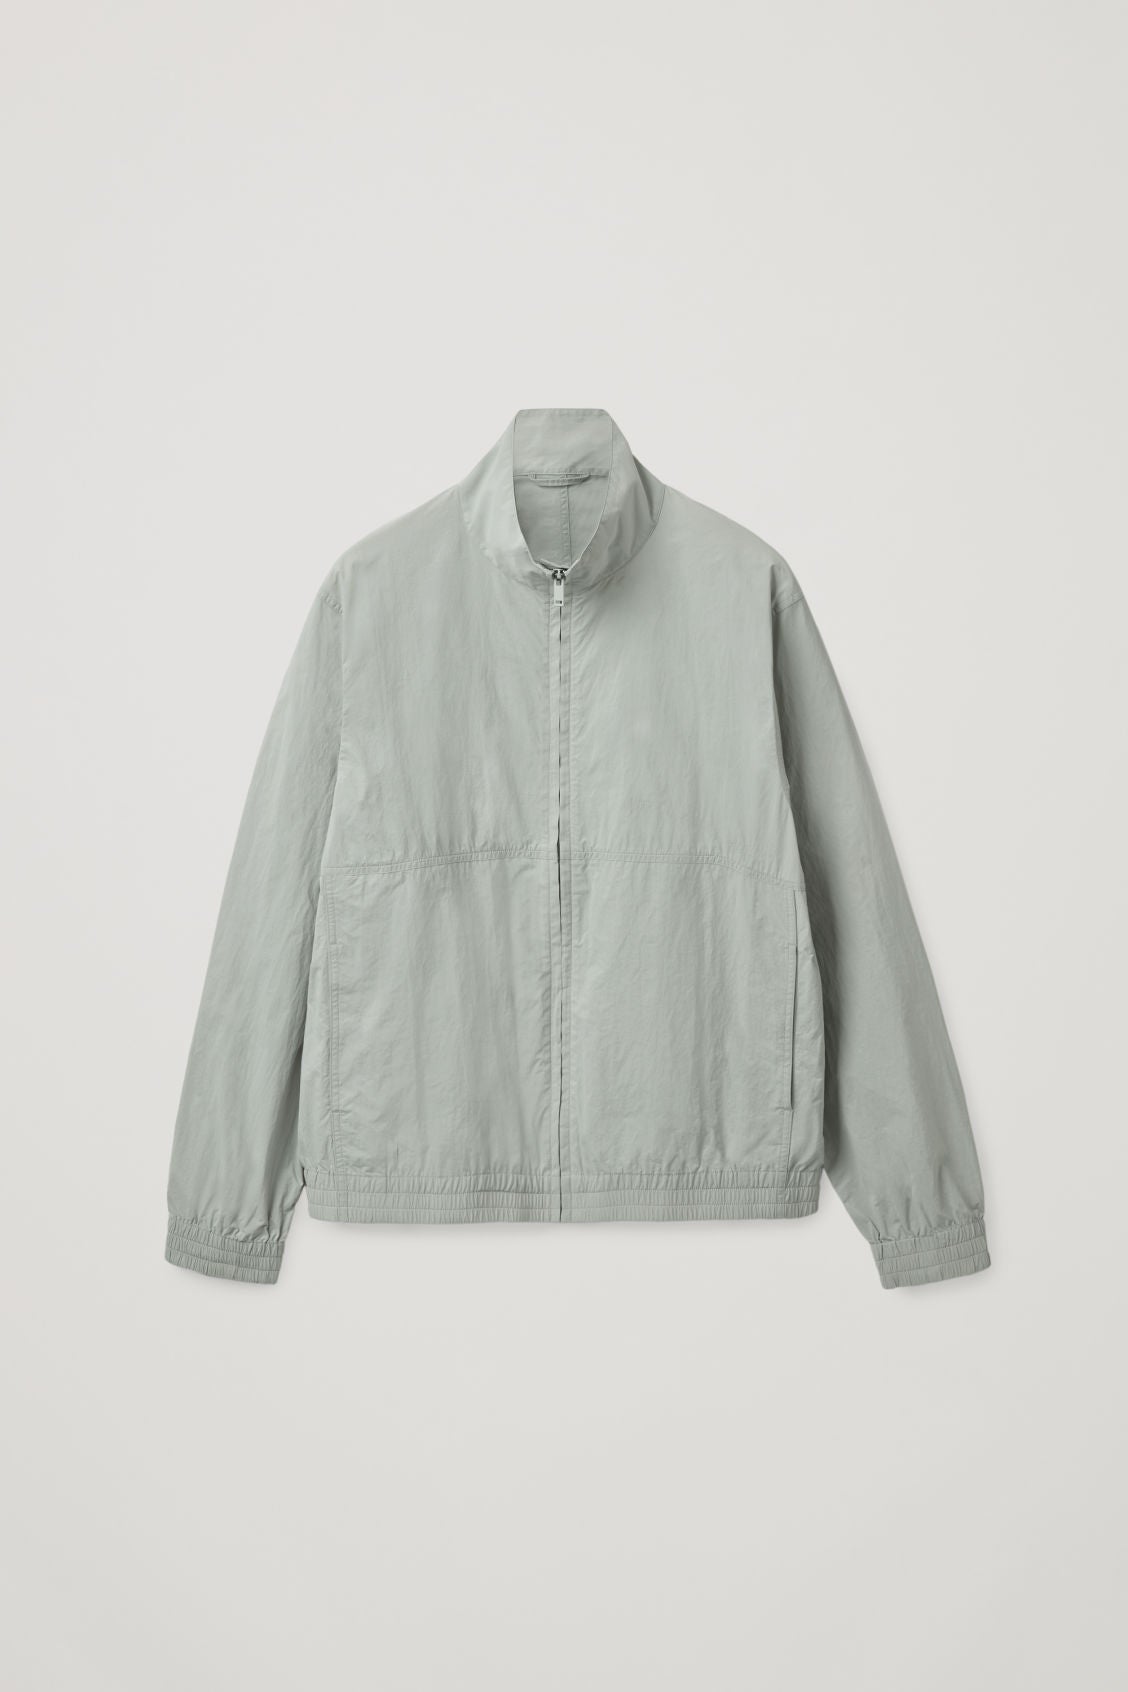 10 Lightweight Jackets Ideal For That Transitional Period Between Summer And Fall